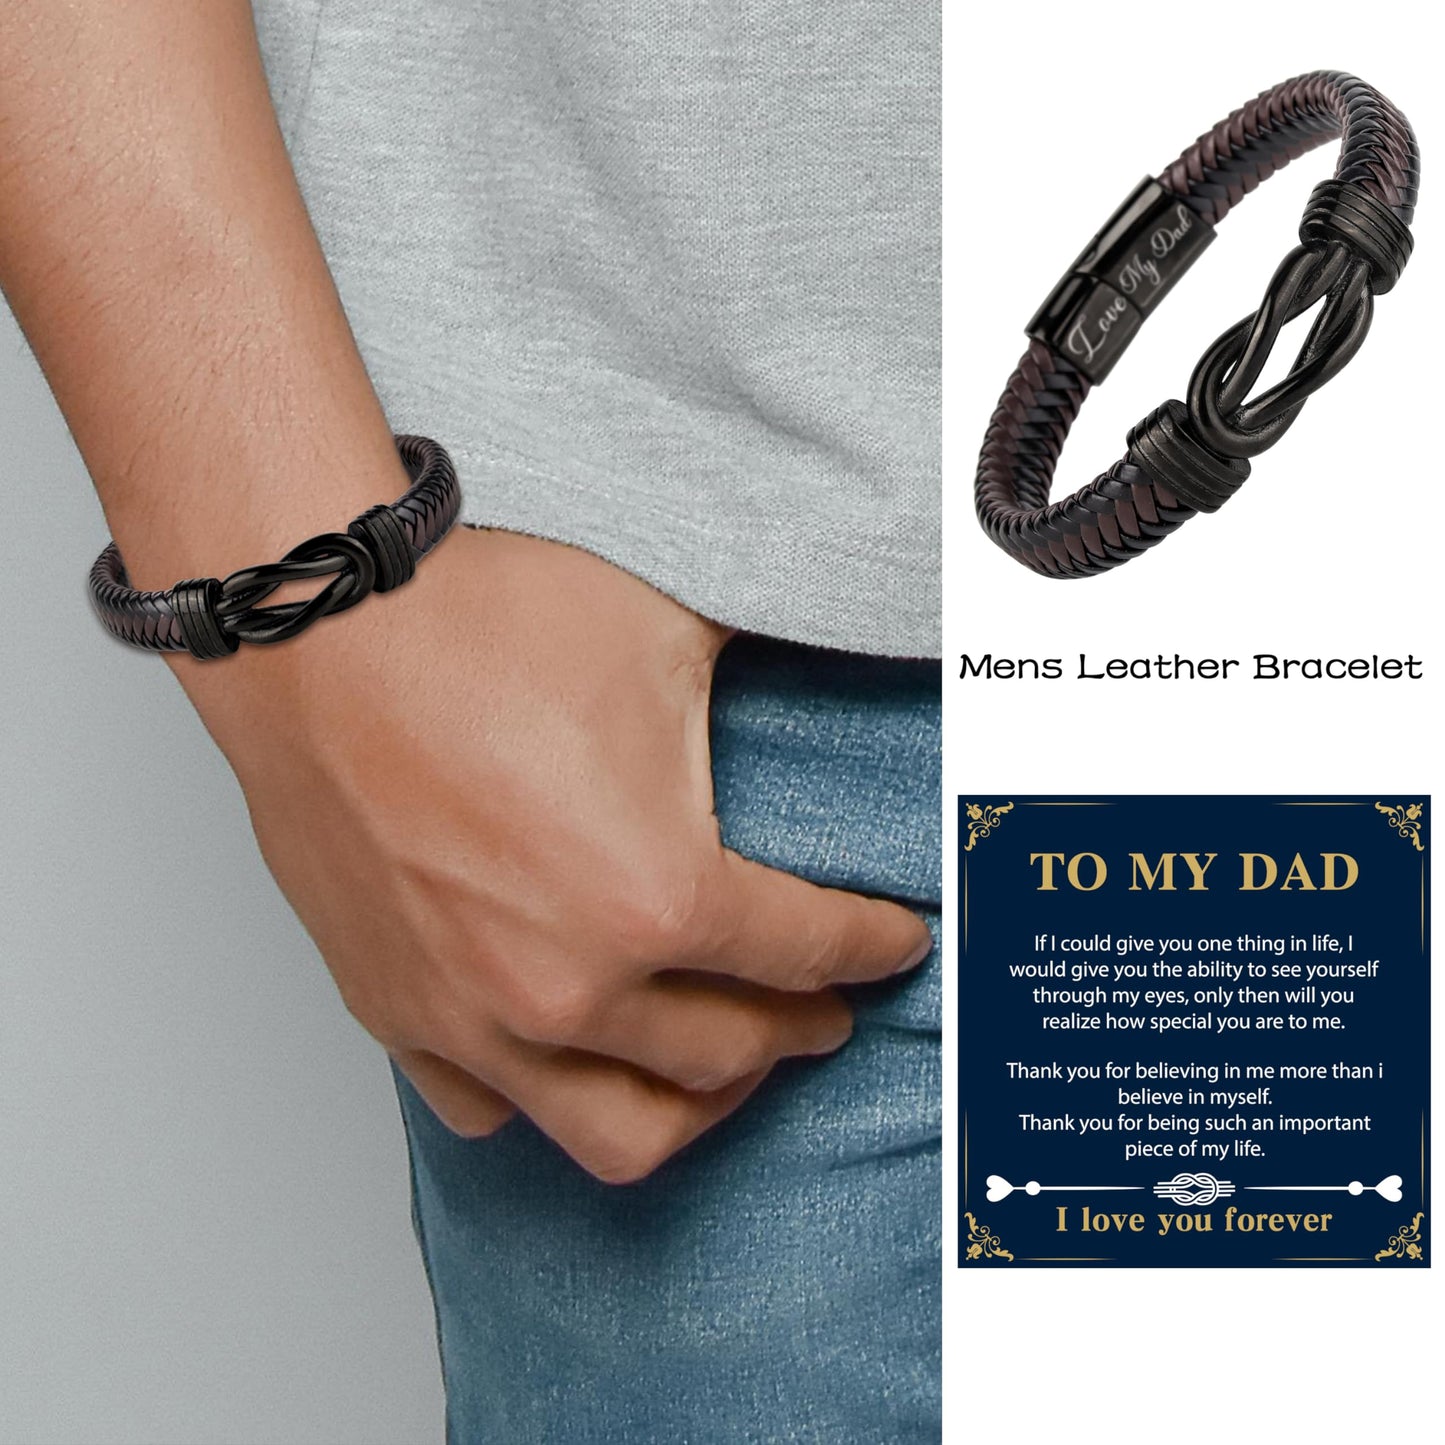 Shoppawhile Gifts for Dad Mens Leather Bracelet Dad Fathers Day Birthday Gifts from Daughter Son Unique Presents for Dad Christmas